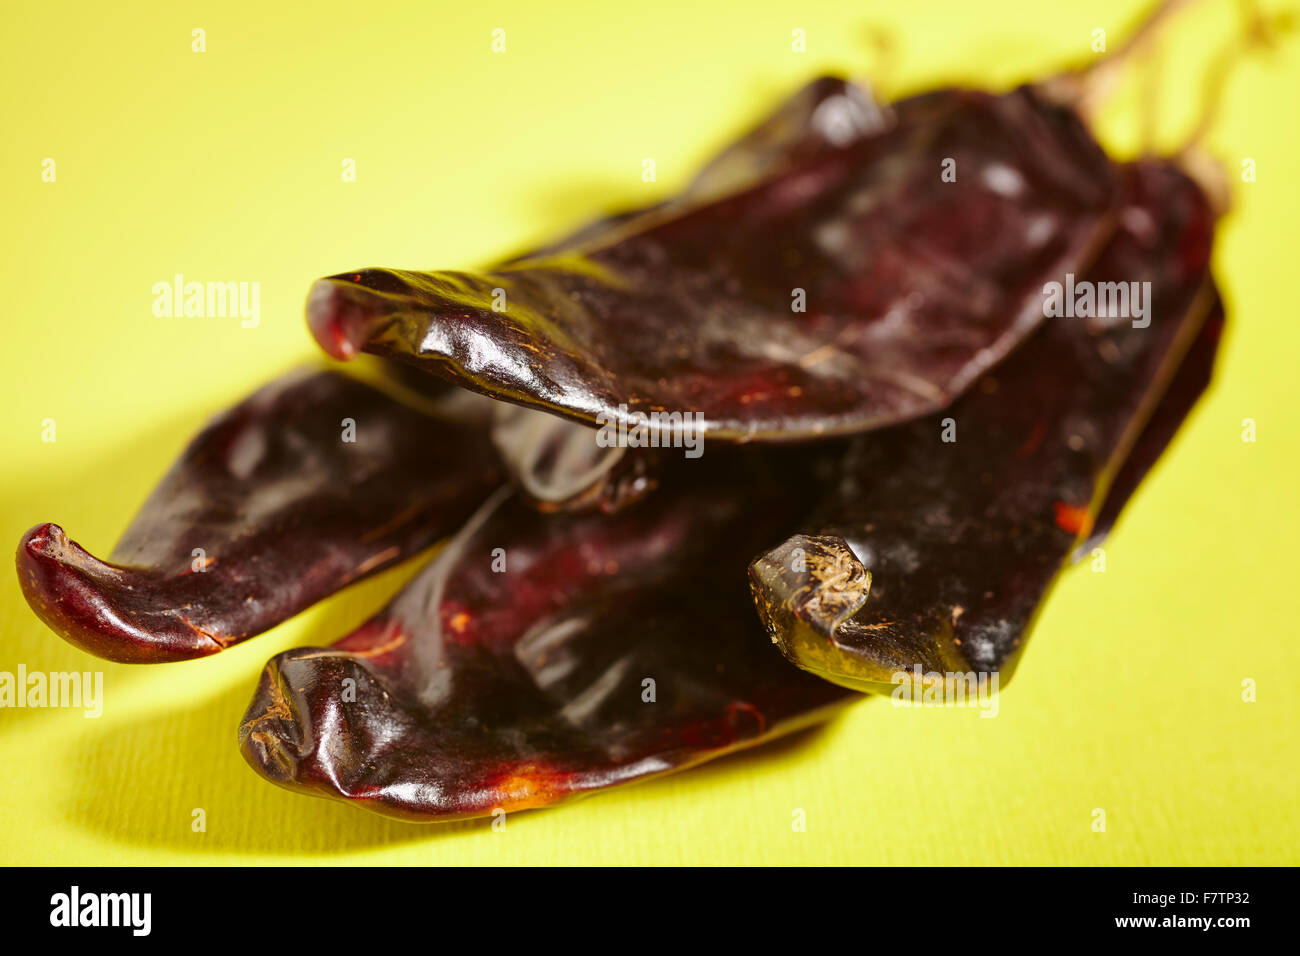 Whole, dried guajillo peppers from Mexico Stock Photo